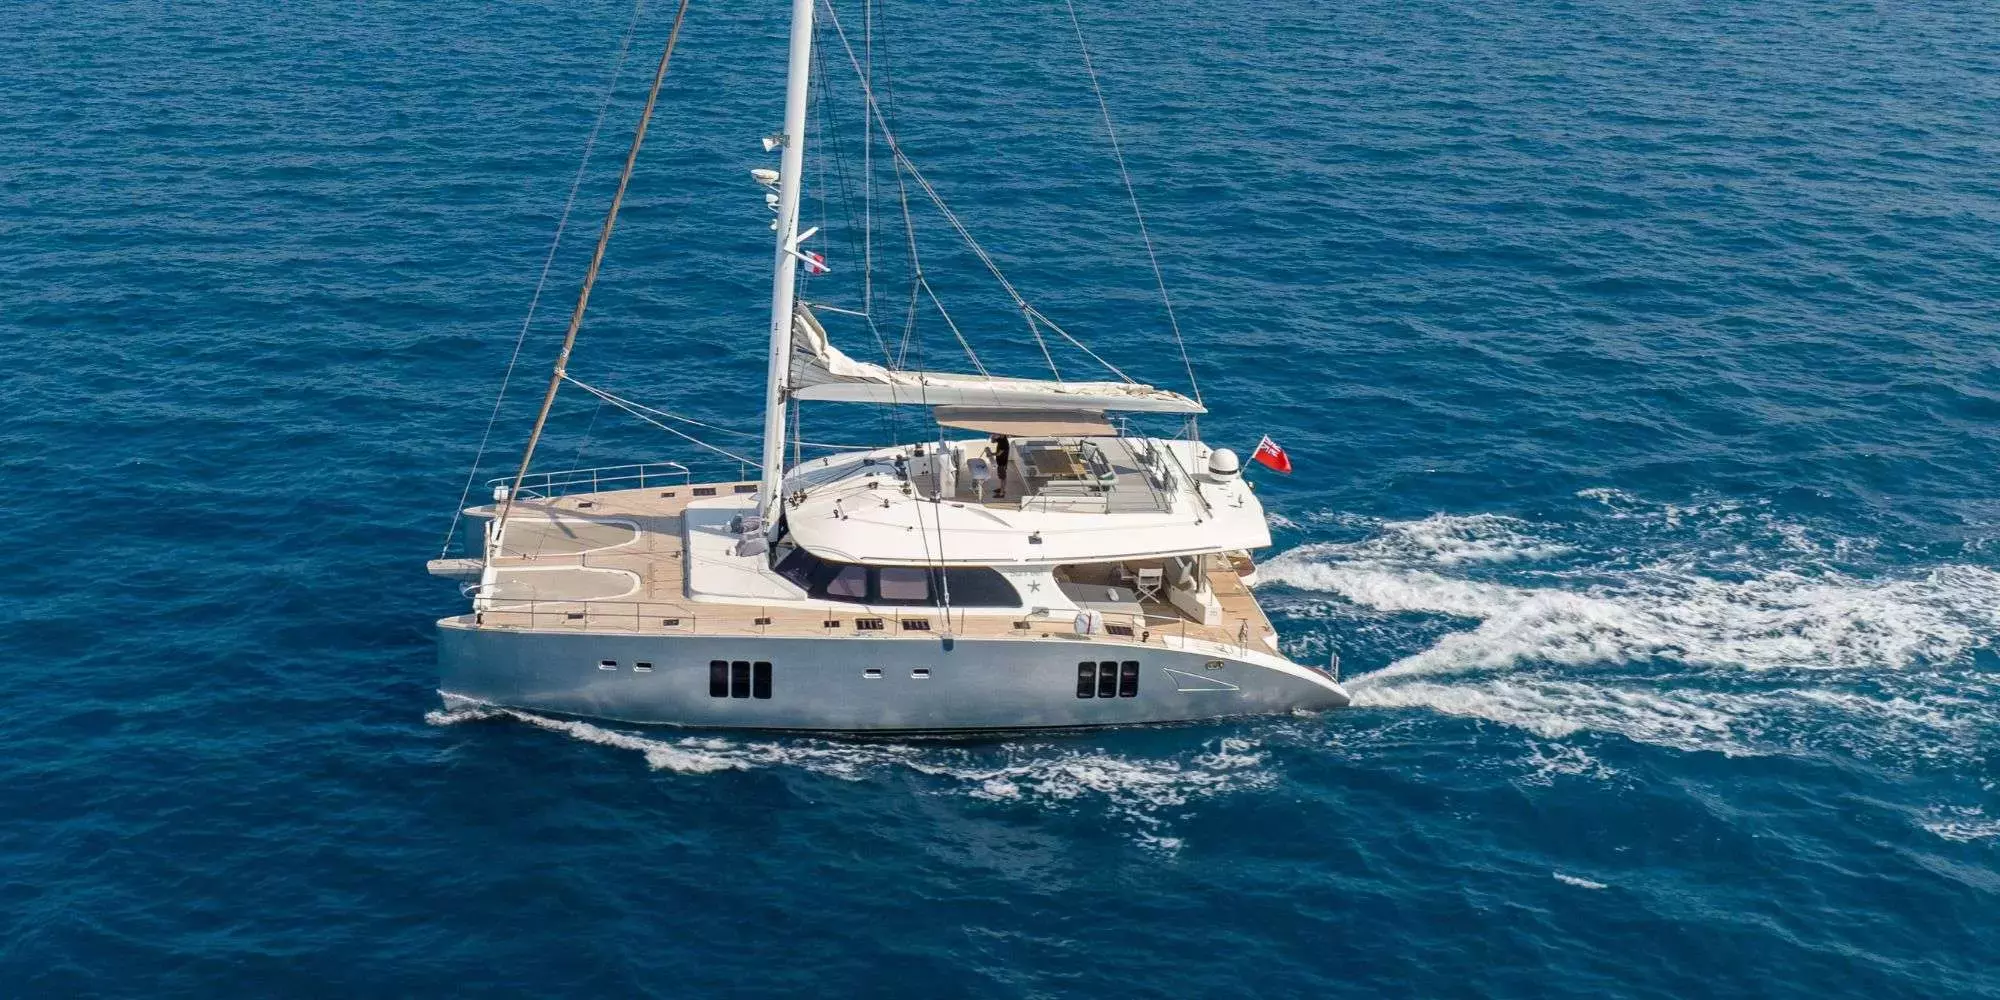 Seazen II by Sunreef Yachts - Special Offer for a private Luxury Catamaran Charter in Corsica with a crew